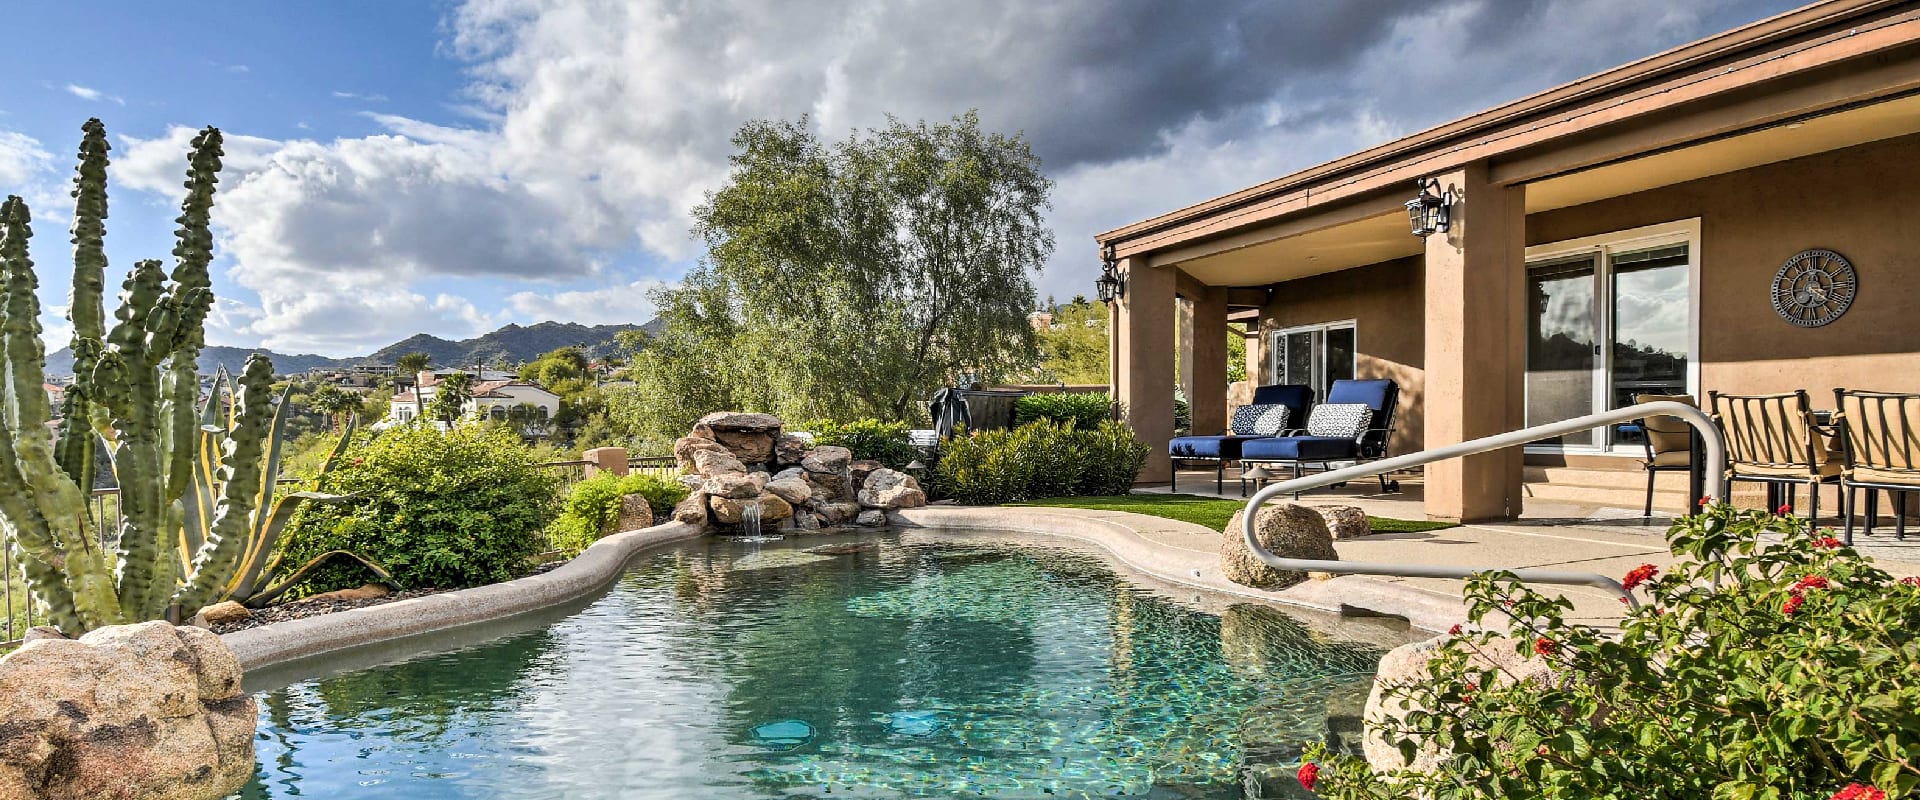 Vacation rental with private pool overlooking the Arizona mountains surrounded by cacti, palm trees, and bushes